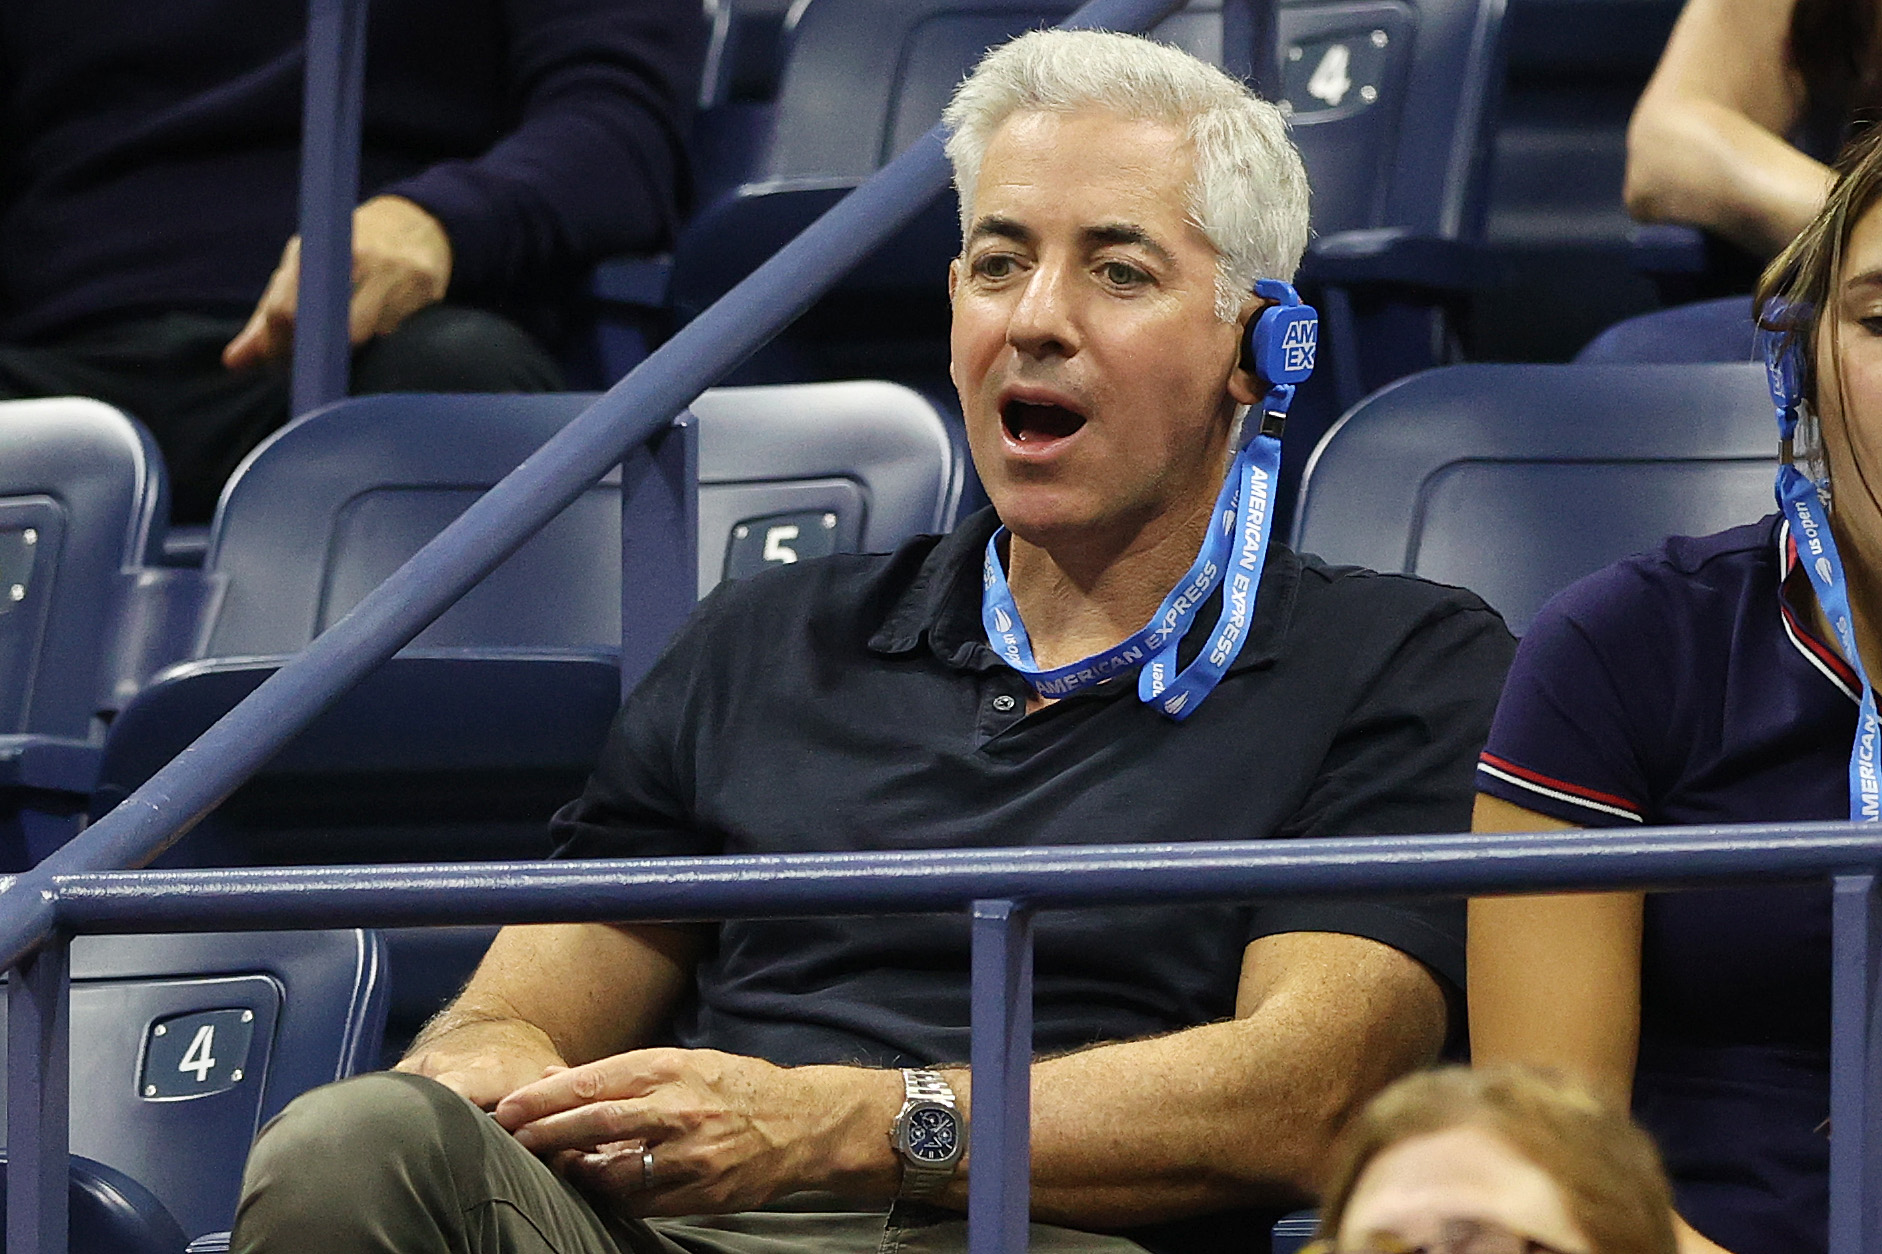 Investor Bill Ackman, wearing one of those goofy headsets you can rent that play the radio broadcast, watches Emma Radacanu play at the 2021 U.S. Open in Queens, NY.